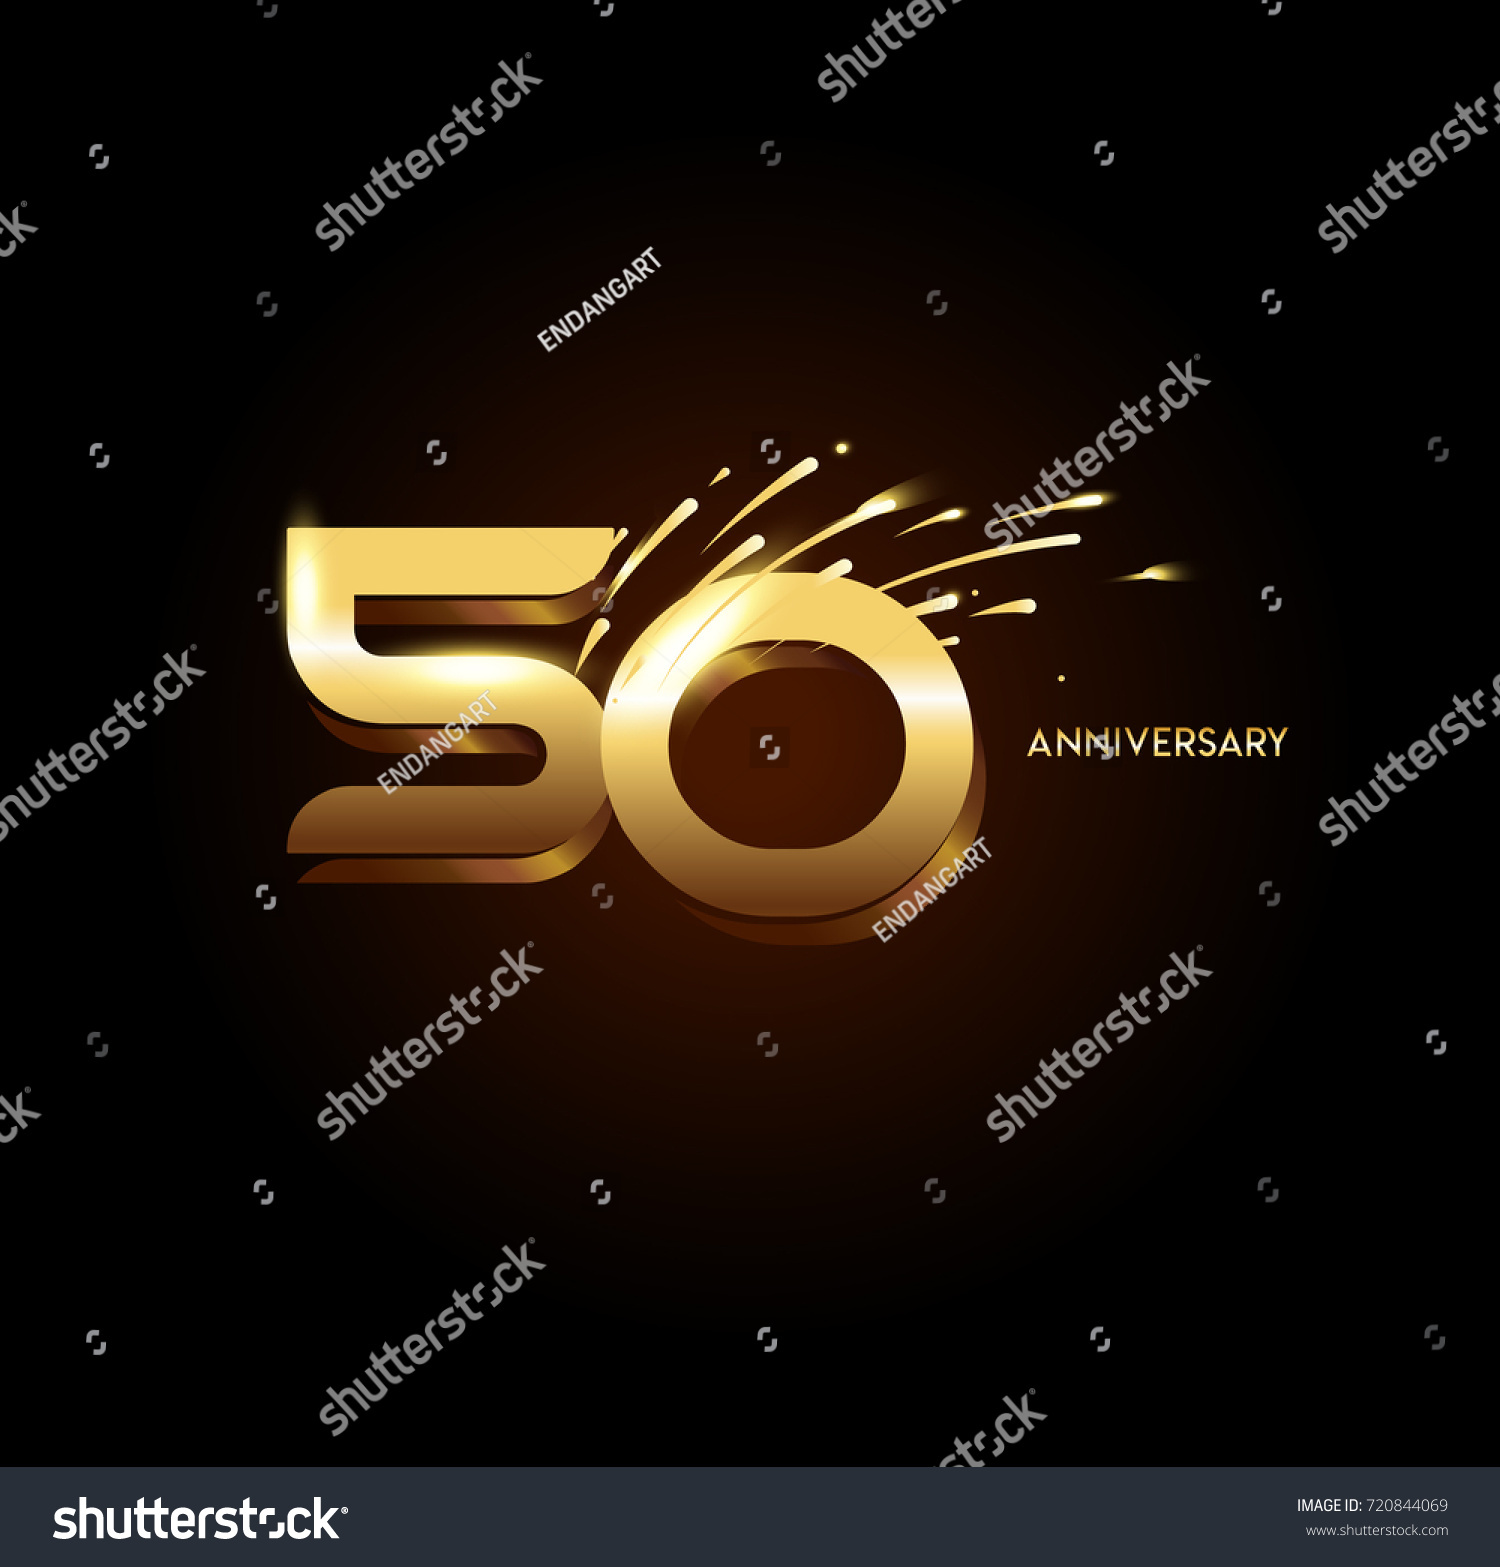 SVG of 50 Anniversary with fireworks and shiny gold on dark background.Greeting card, banner, poster svg